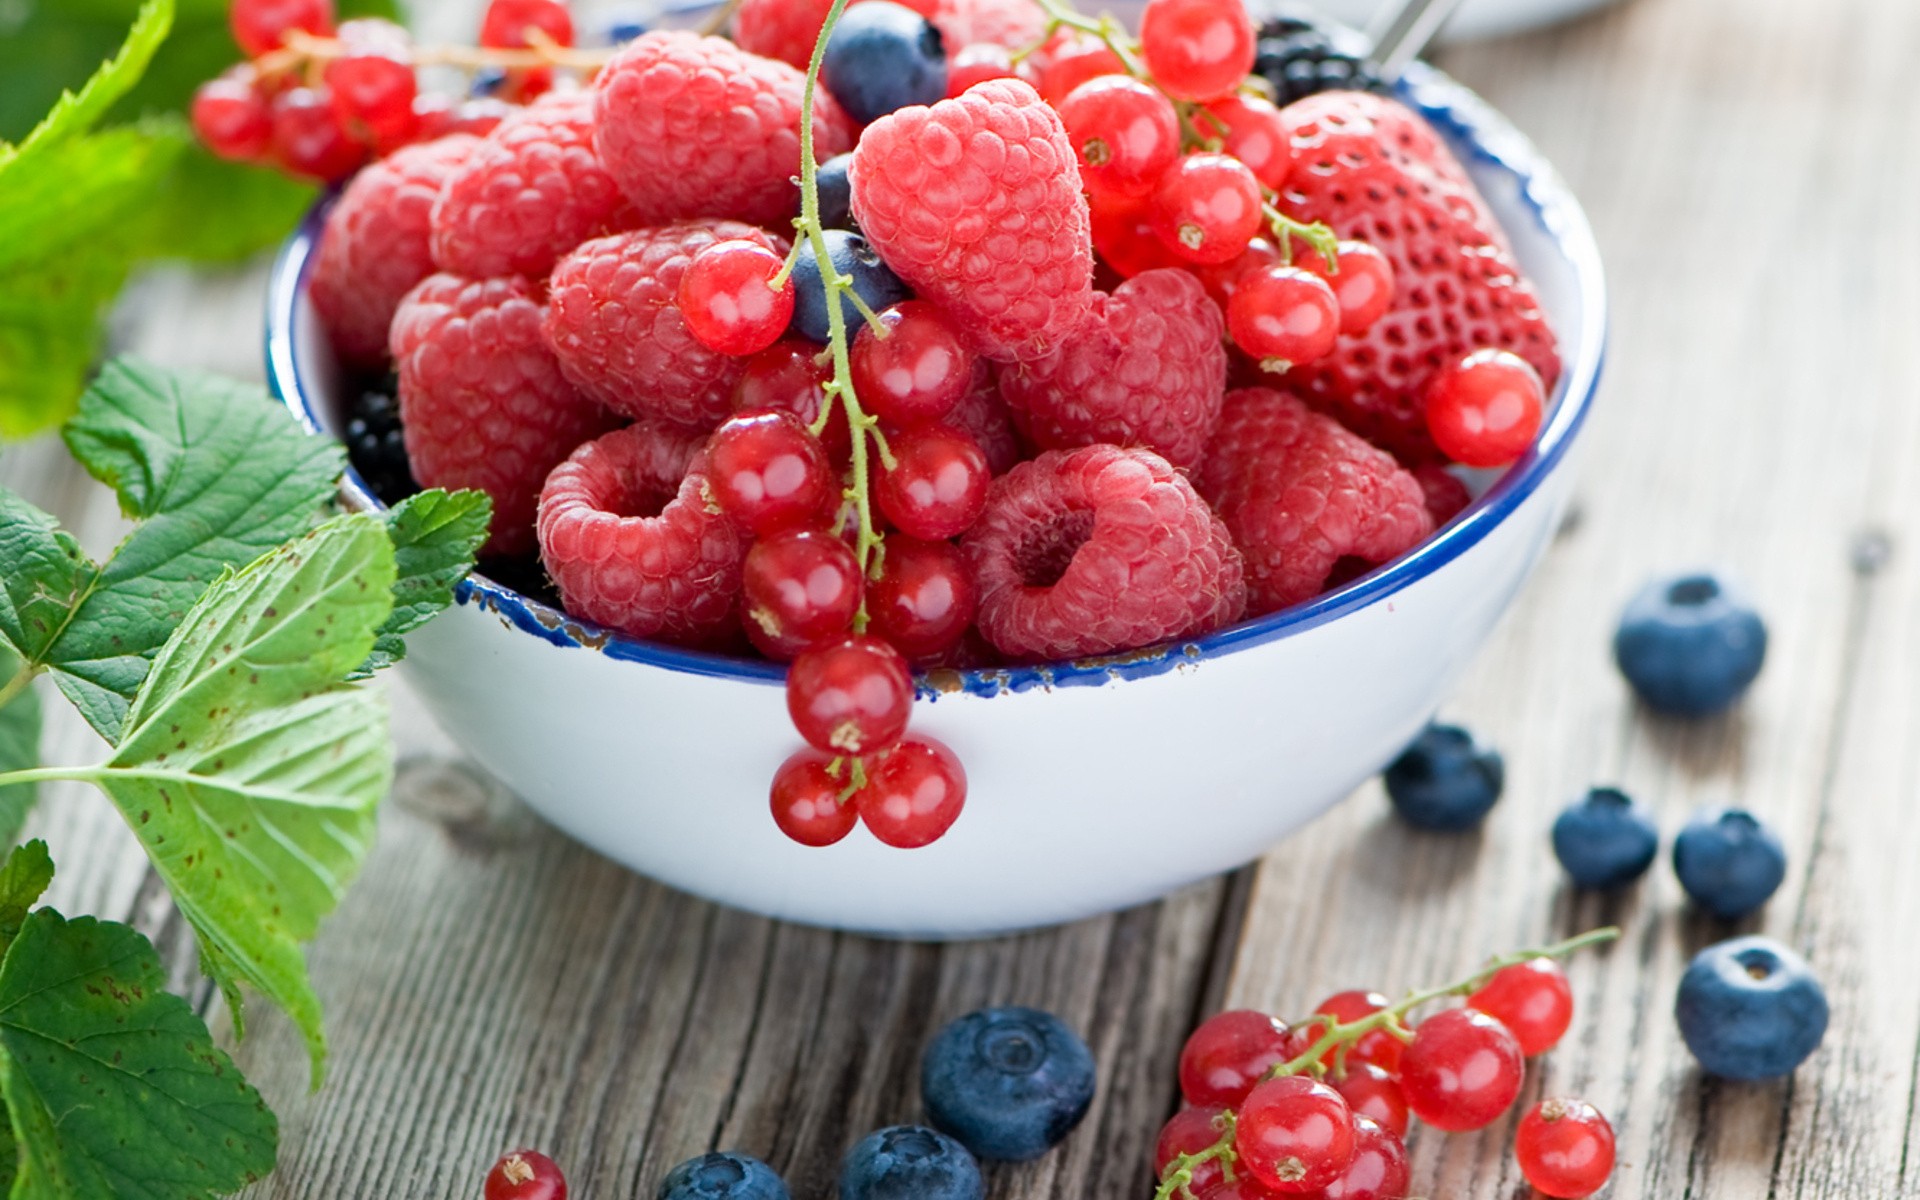 General 1920x1200 food lunch colorful fruit blueberries bowls berries closeup raspberries wooden surface